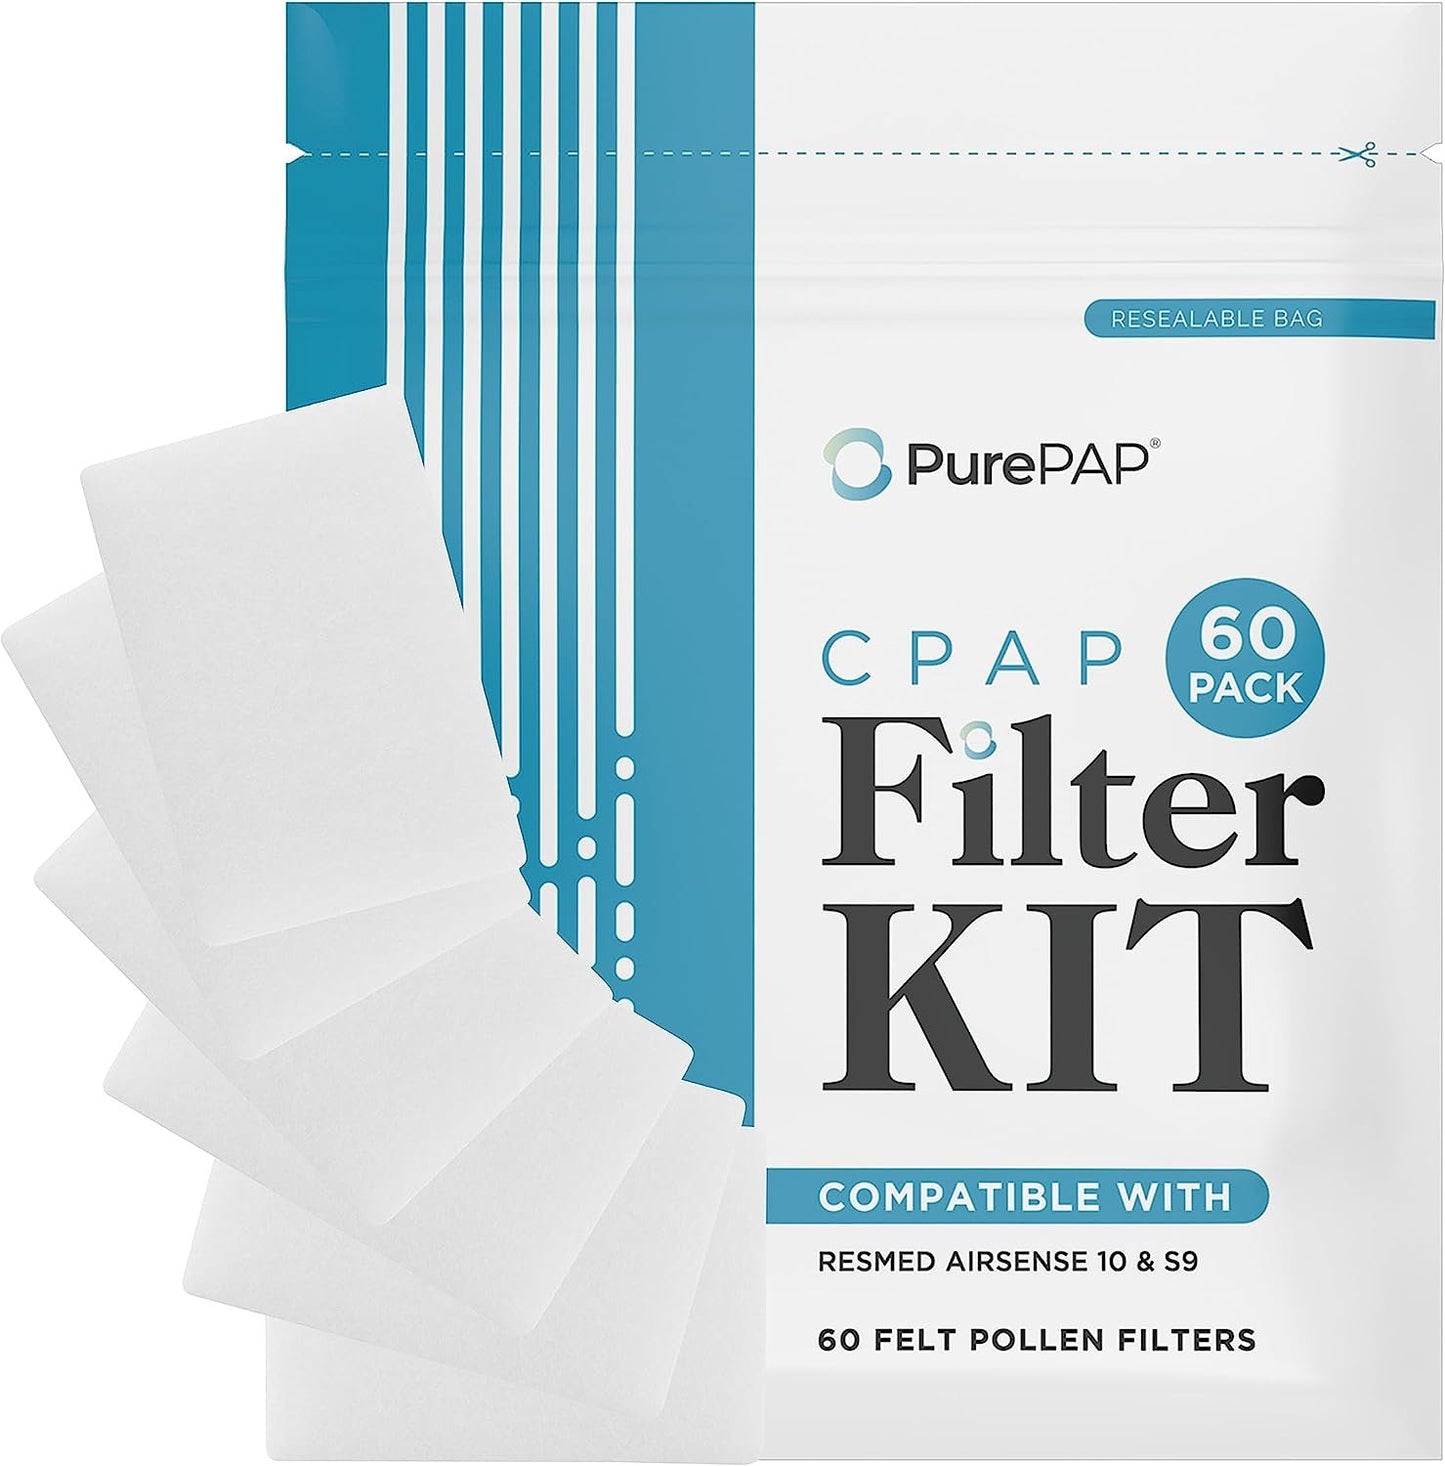 Premium USA Made CPAP Filters - 60-Pack, Compatible with ResMed AirSense 10 & S9 Machines - High Quality CPAP Supplies